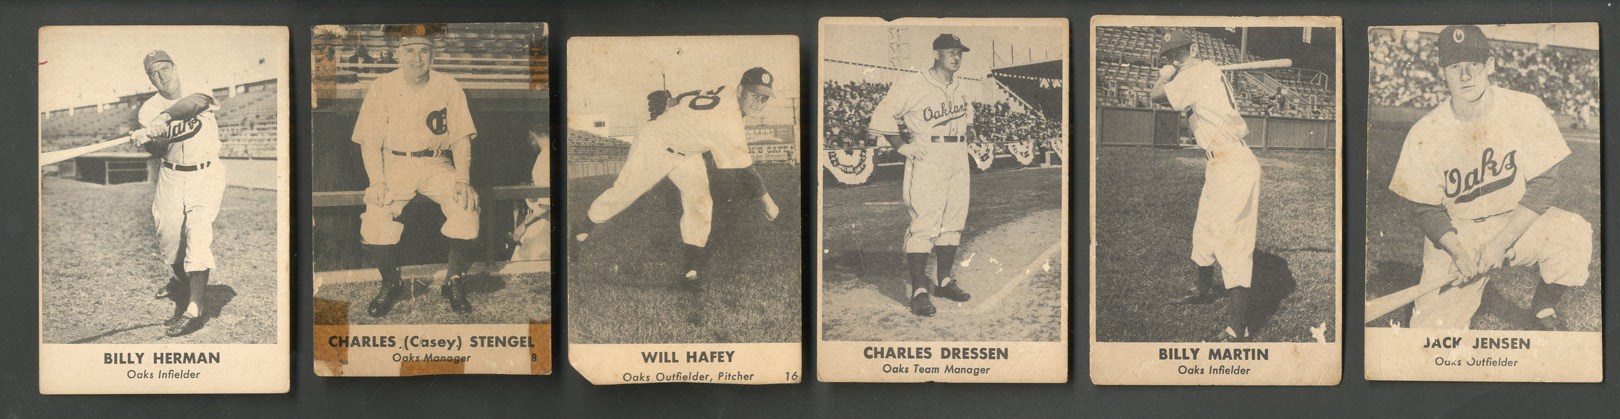 Baseball and Trading Cards - 1946-50 Remar Bread PCL Collection with Billy Martin and Casey Stengel